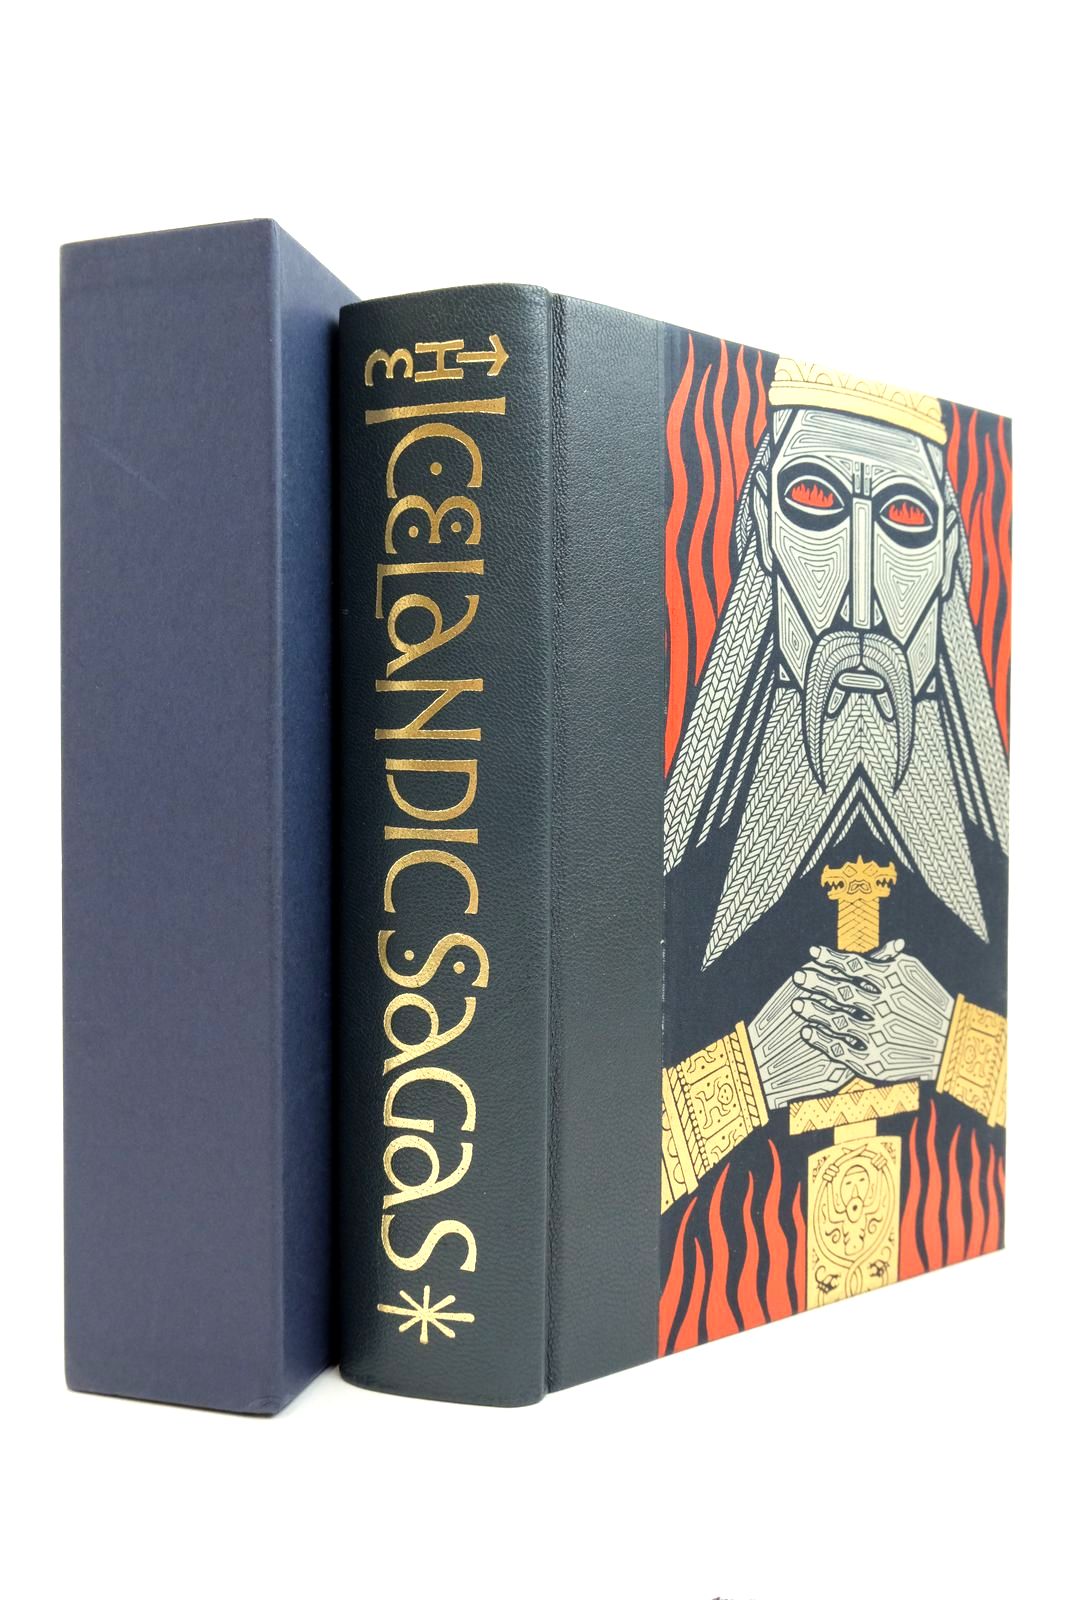 Photo of THE ICELANDIC SAGAS written by Magnusson, Magnus illustrated by Noyes, Simon published by Folio Society (STOCK CODE: 2139594)  for sale by Stella & Rose's Books